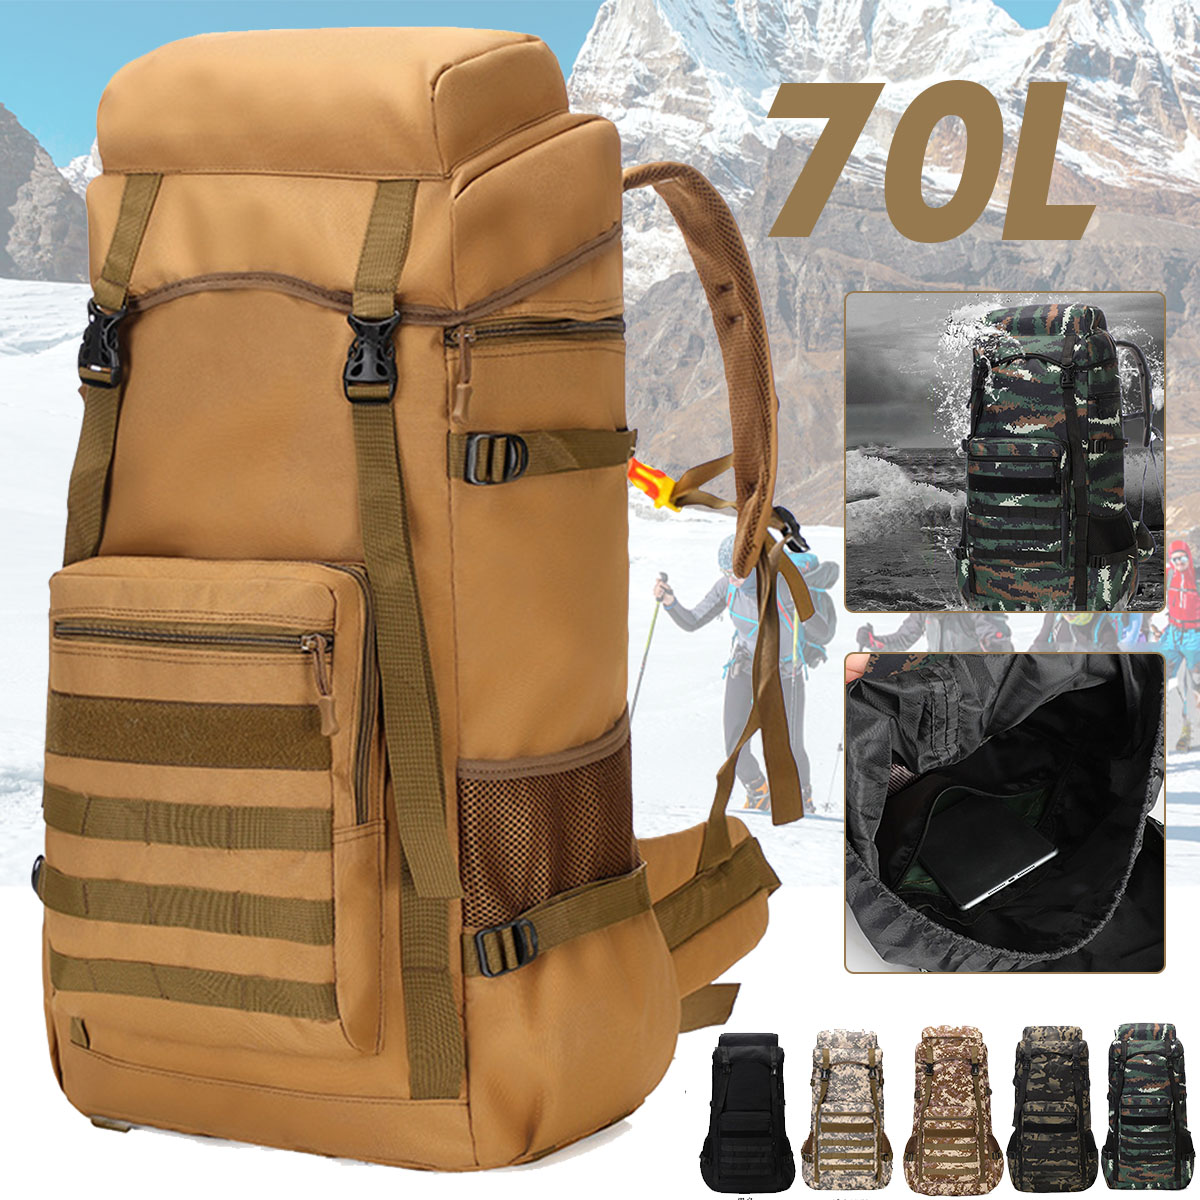 70L-Outdoor-Waterproof-Military-Tactical-Backpack-Camping-Hiking-Backpack-Trekking-Camouflage-Travel-1759458-1